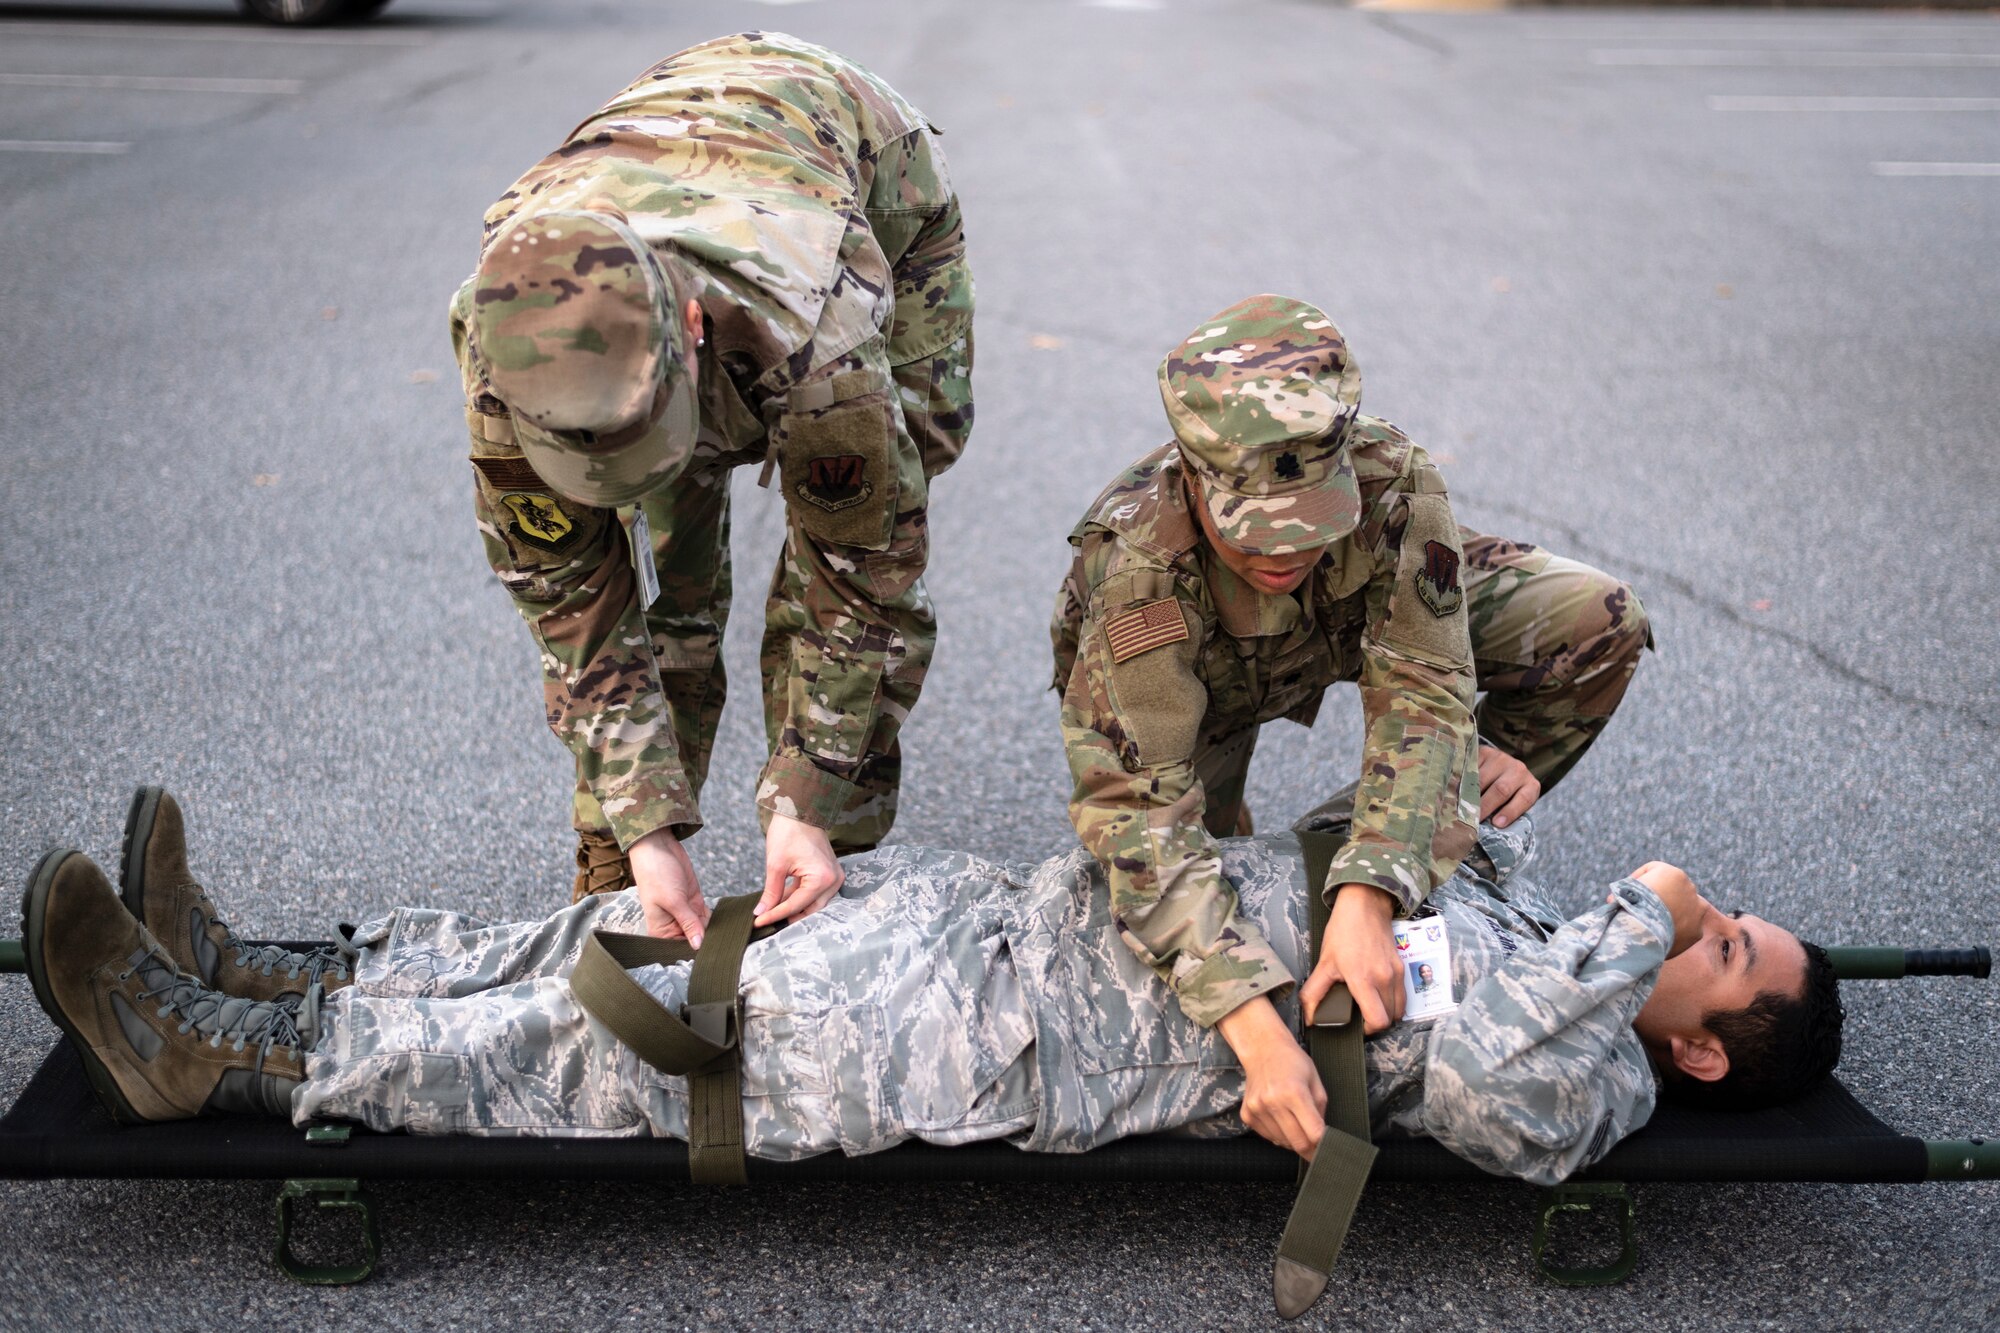 Airmen with the 23d Medical Group (MDG) secure a simulated patient during litter-carry training Oct. 25, 2019, at Moody Air Force Base, Ga. The 23d MDG conducted the training in preparation for the upcoming Thunder Over South Georgia Open House. Airmen practiced litter-carry movements and commands to ensure they have the appropriate skills in the case of an emergency. (U.S. Air Force photo by Airman 1st Class Taryn Butler)